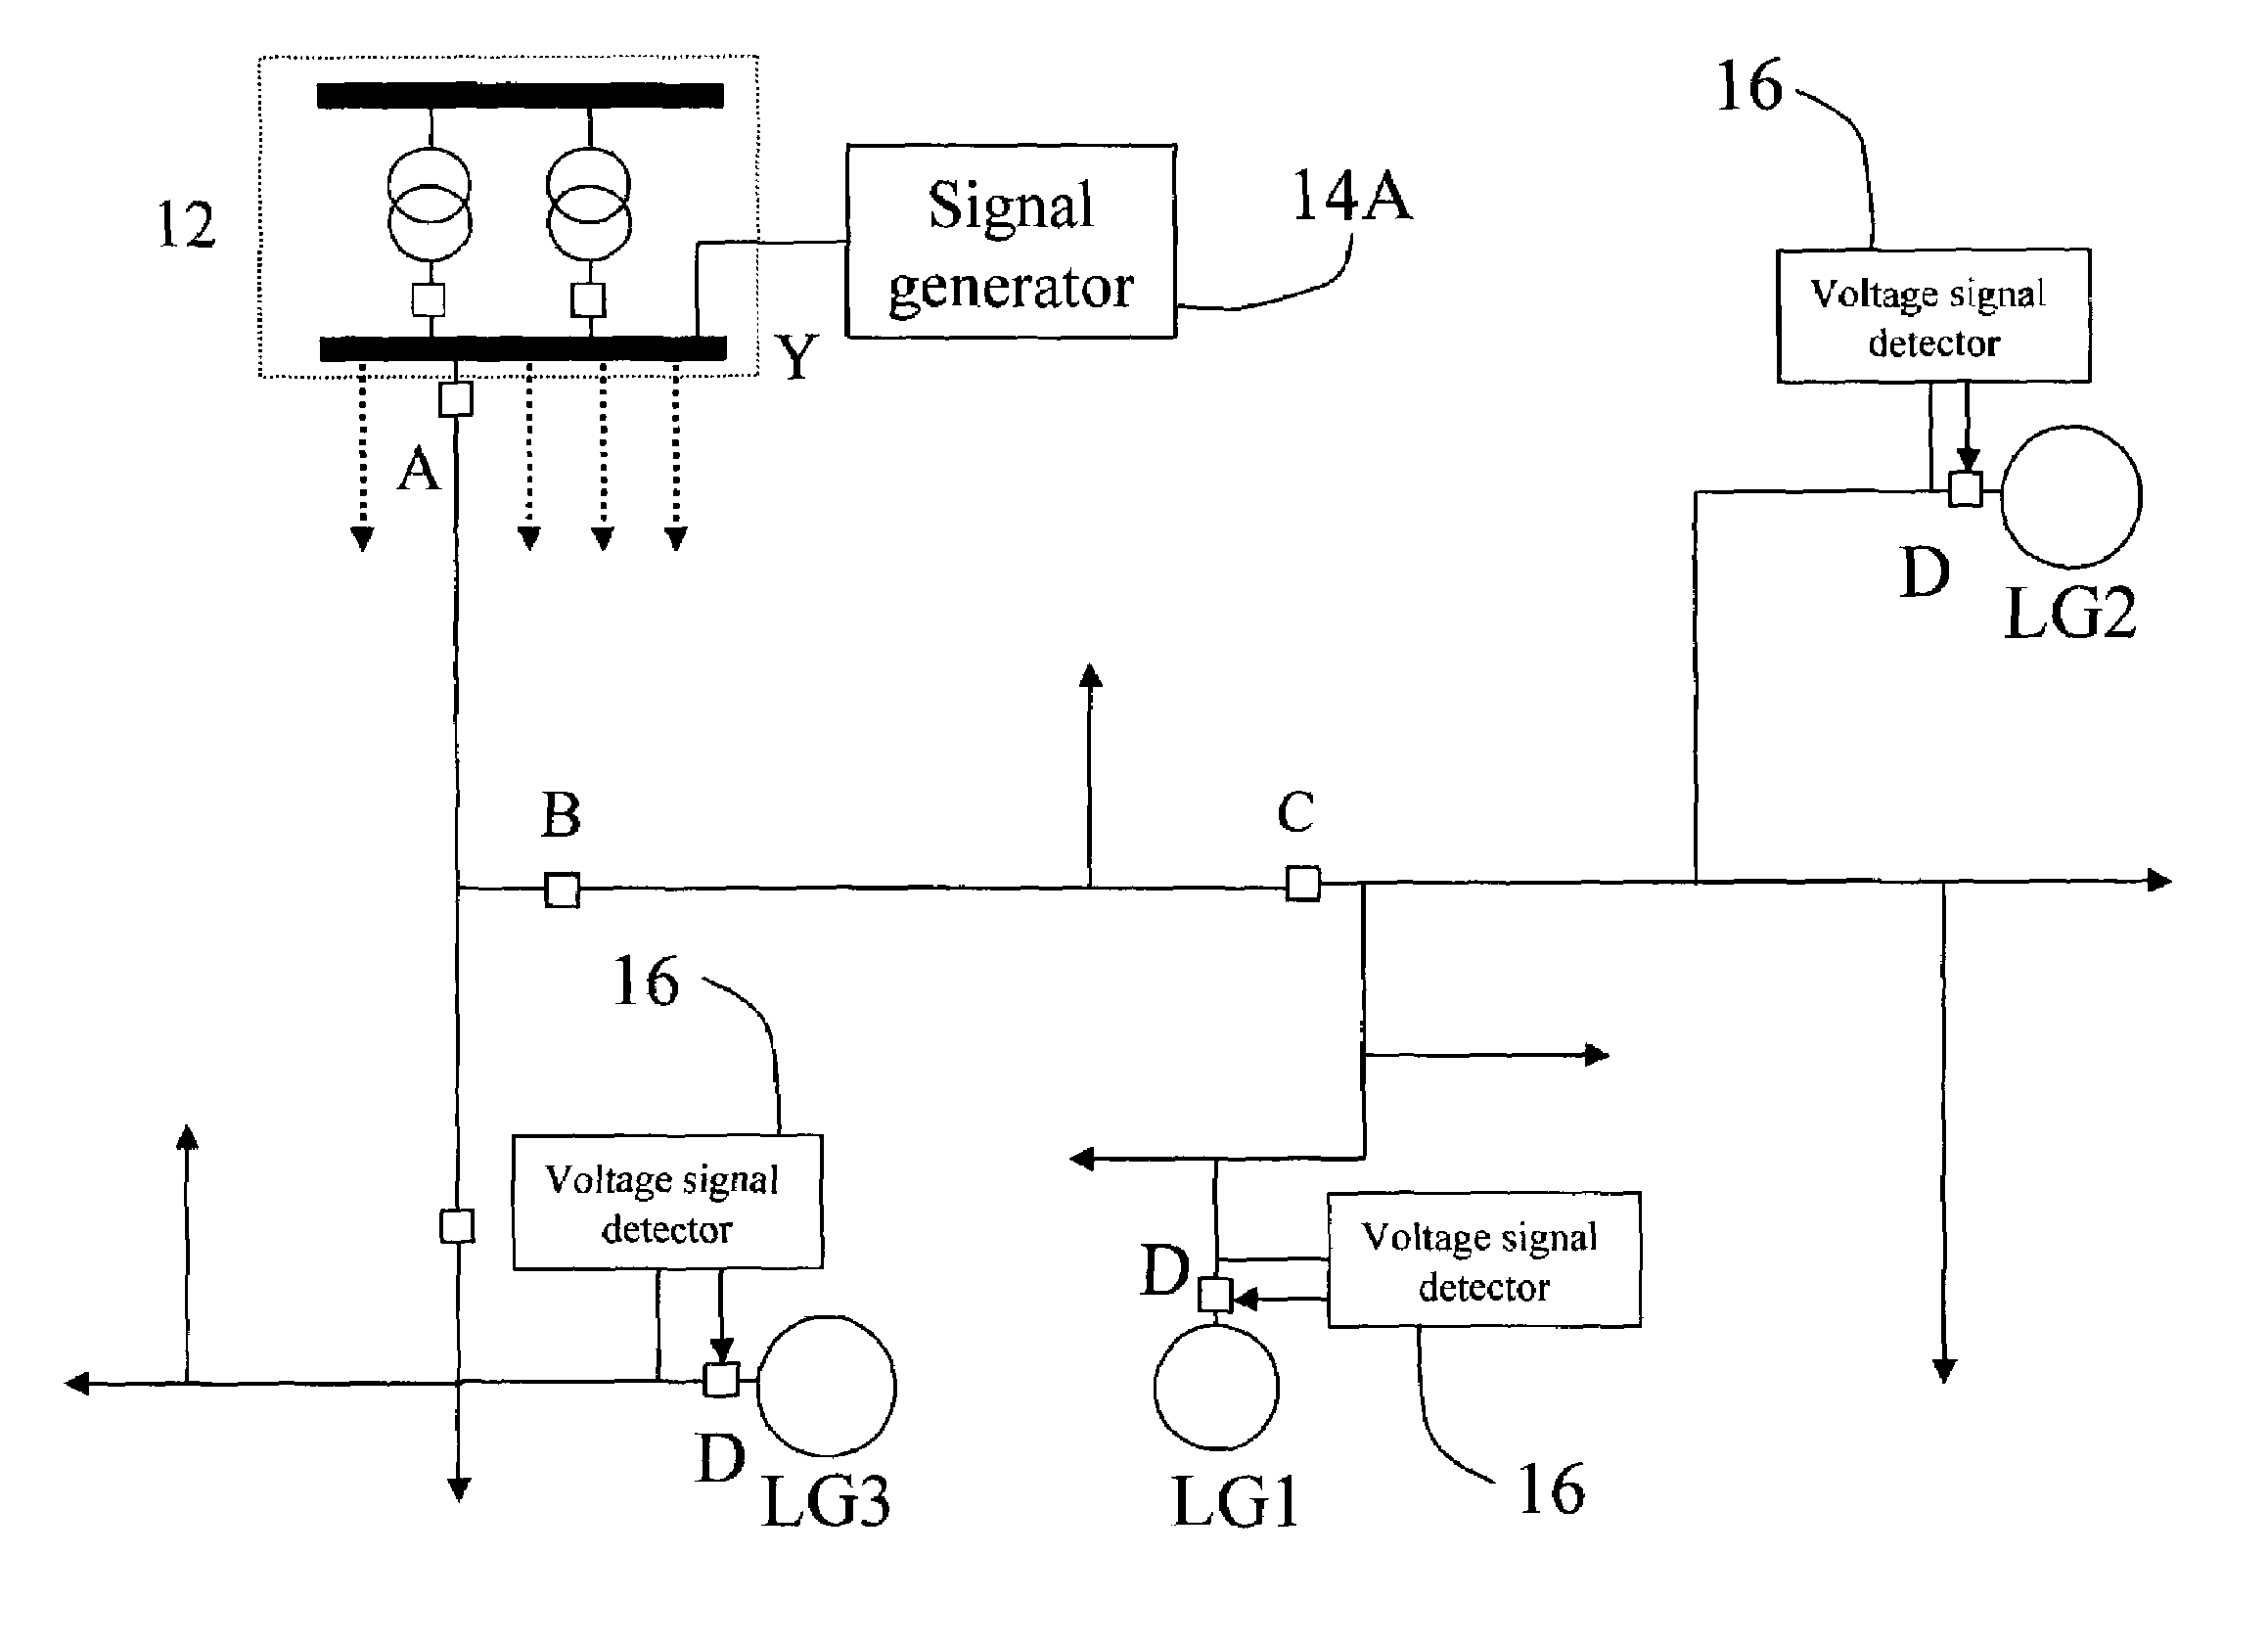 Power signaling based technique for detecting islanding conditions in electric power distribution systems